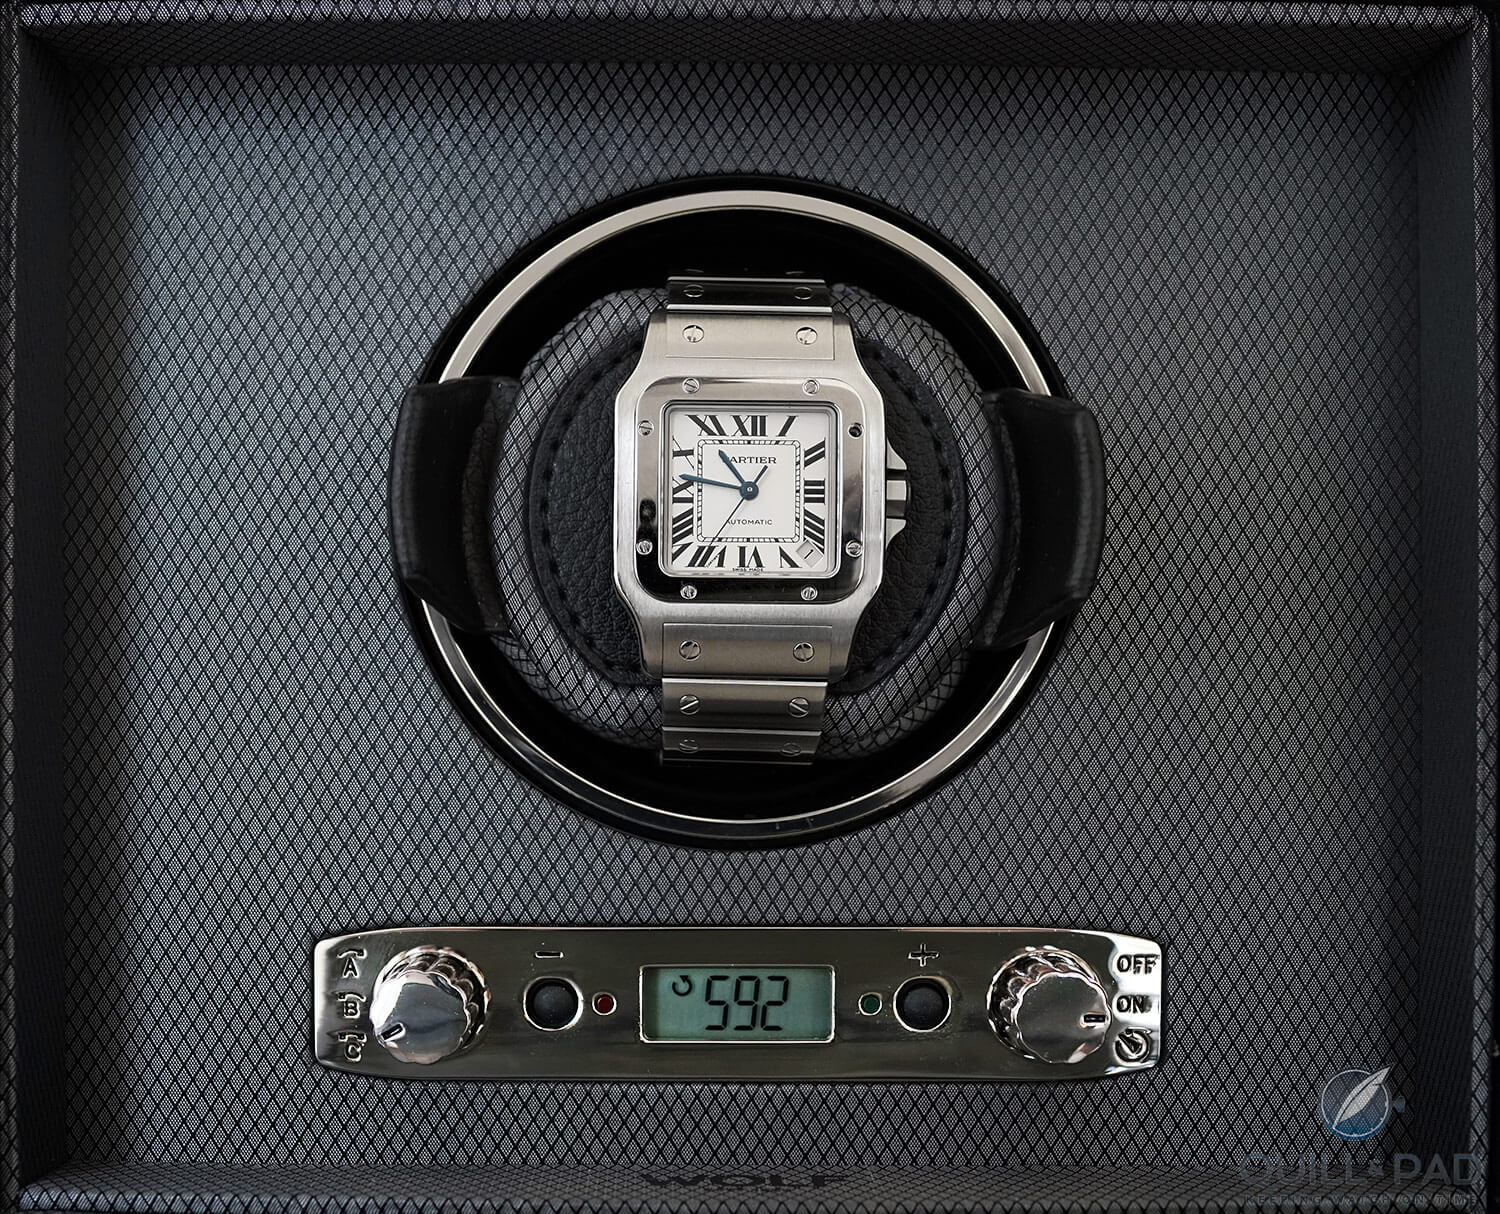 Viceroy watch winder by Wolf